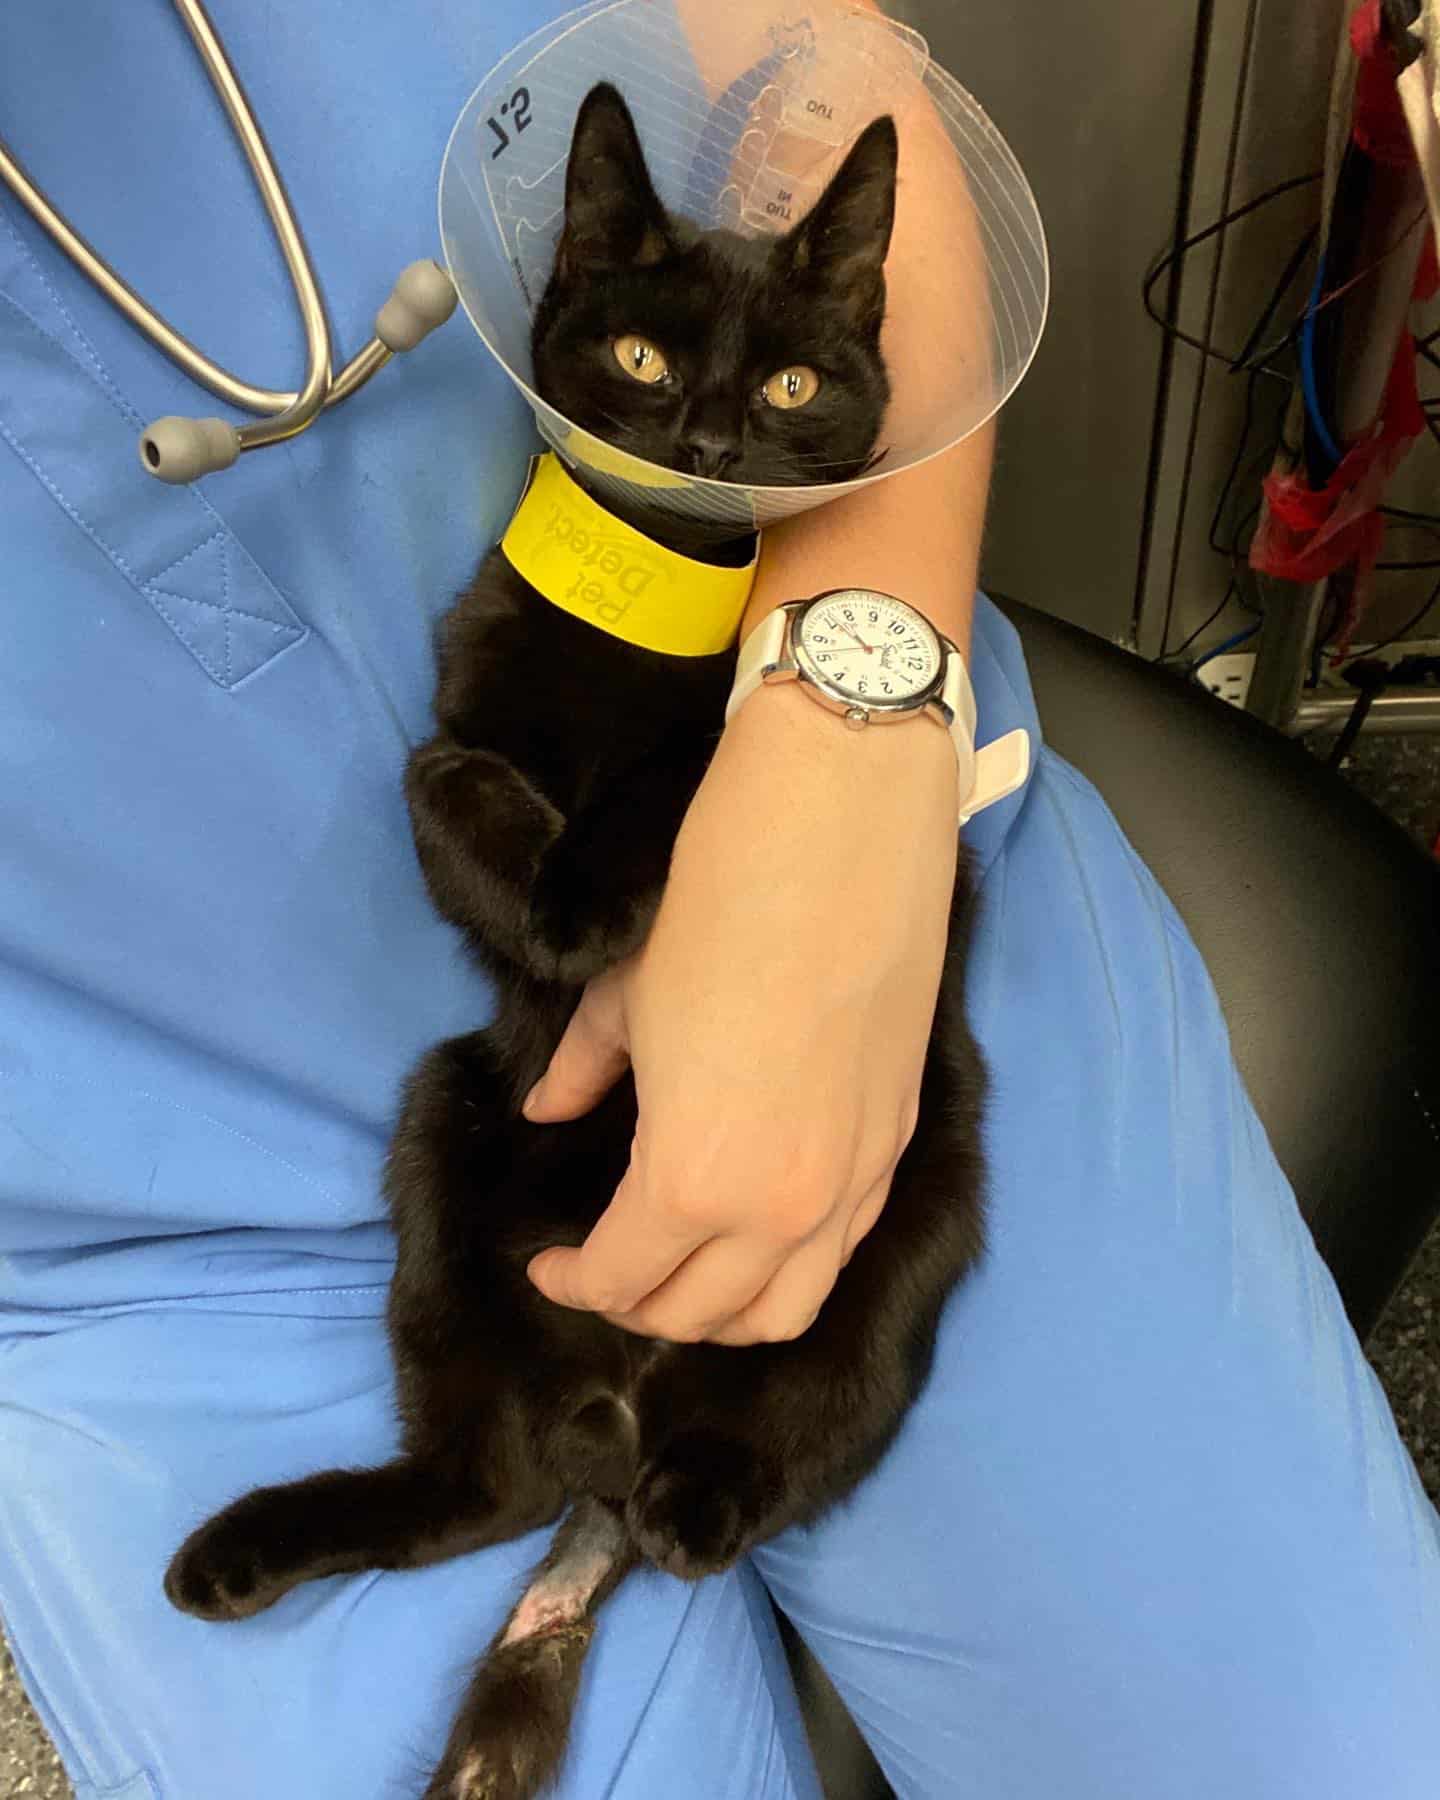 A cat in a veterinarian's arms